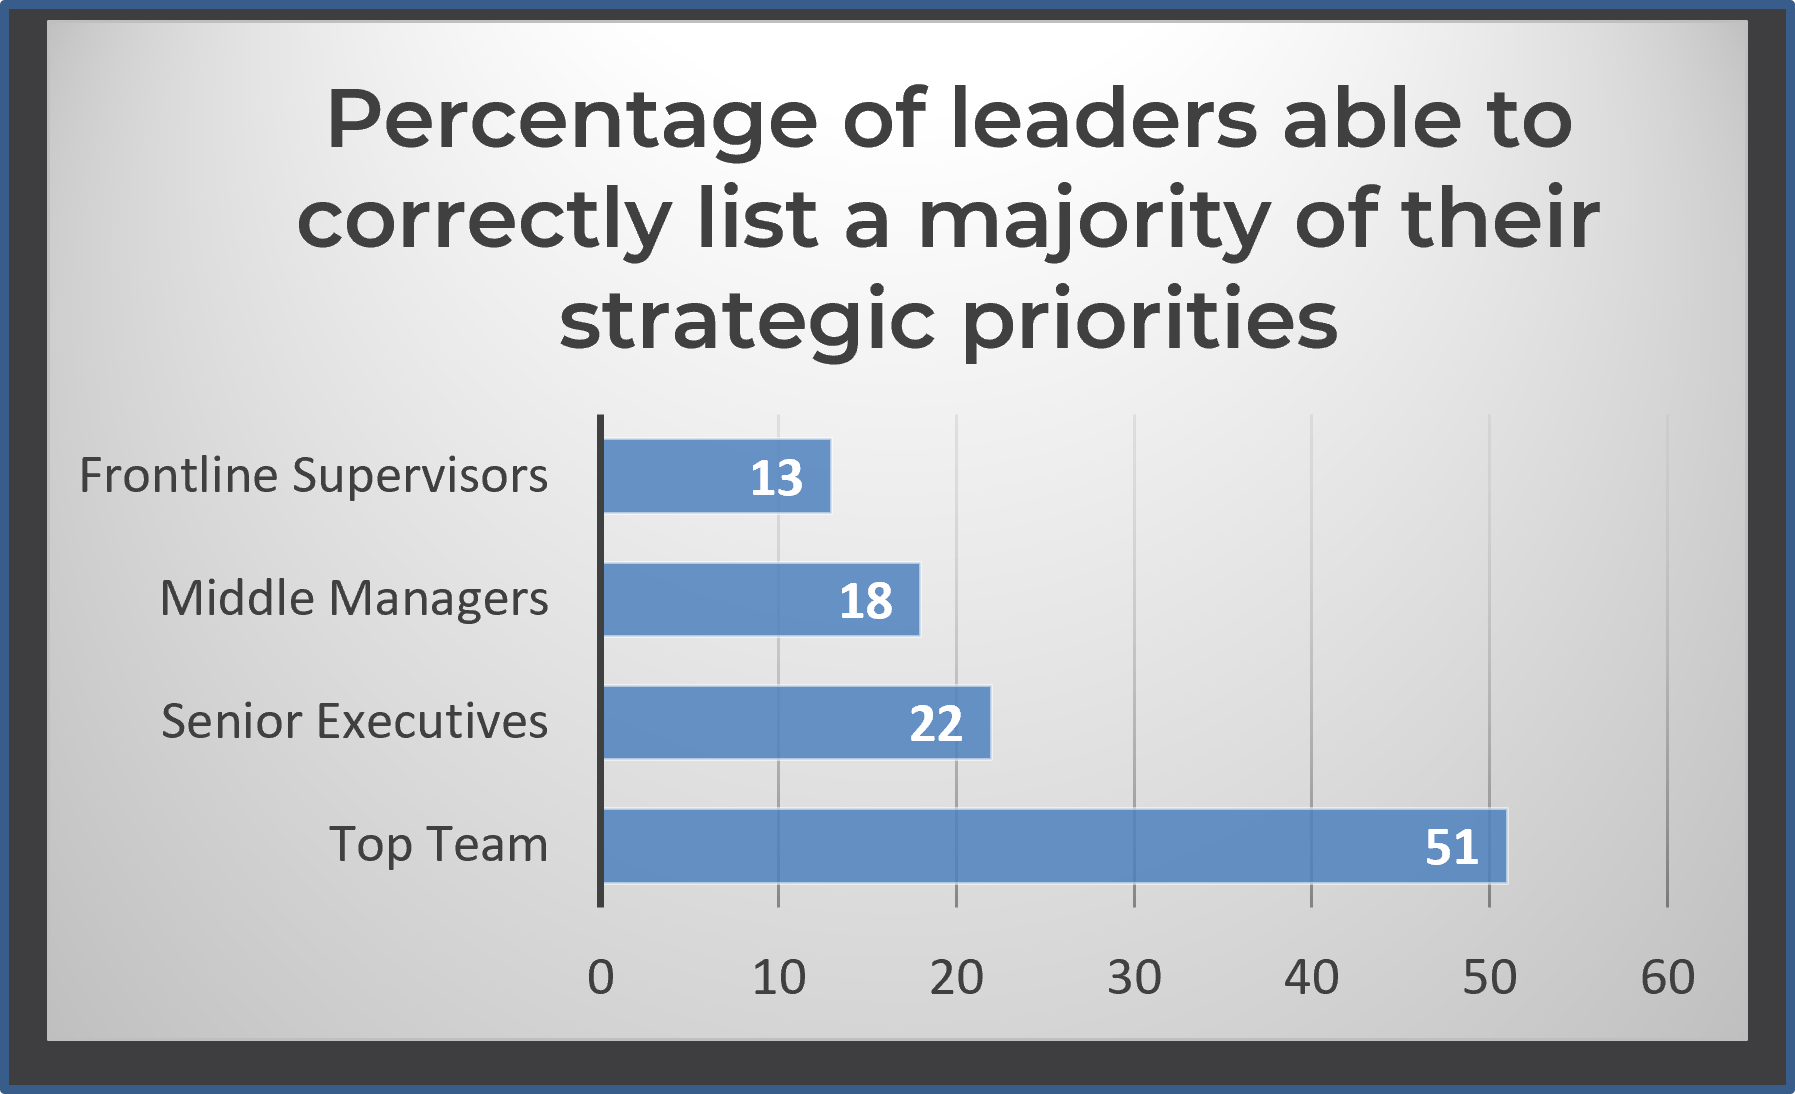 An image of a bar graph showing the percentage of leaders able to correctly list a majority of their strategic priorities.